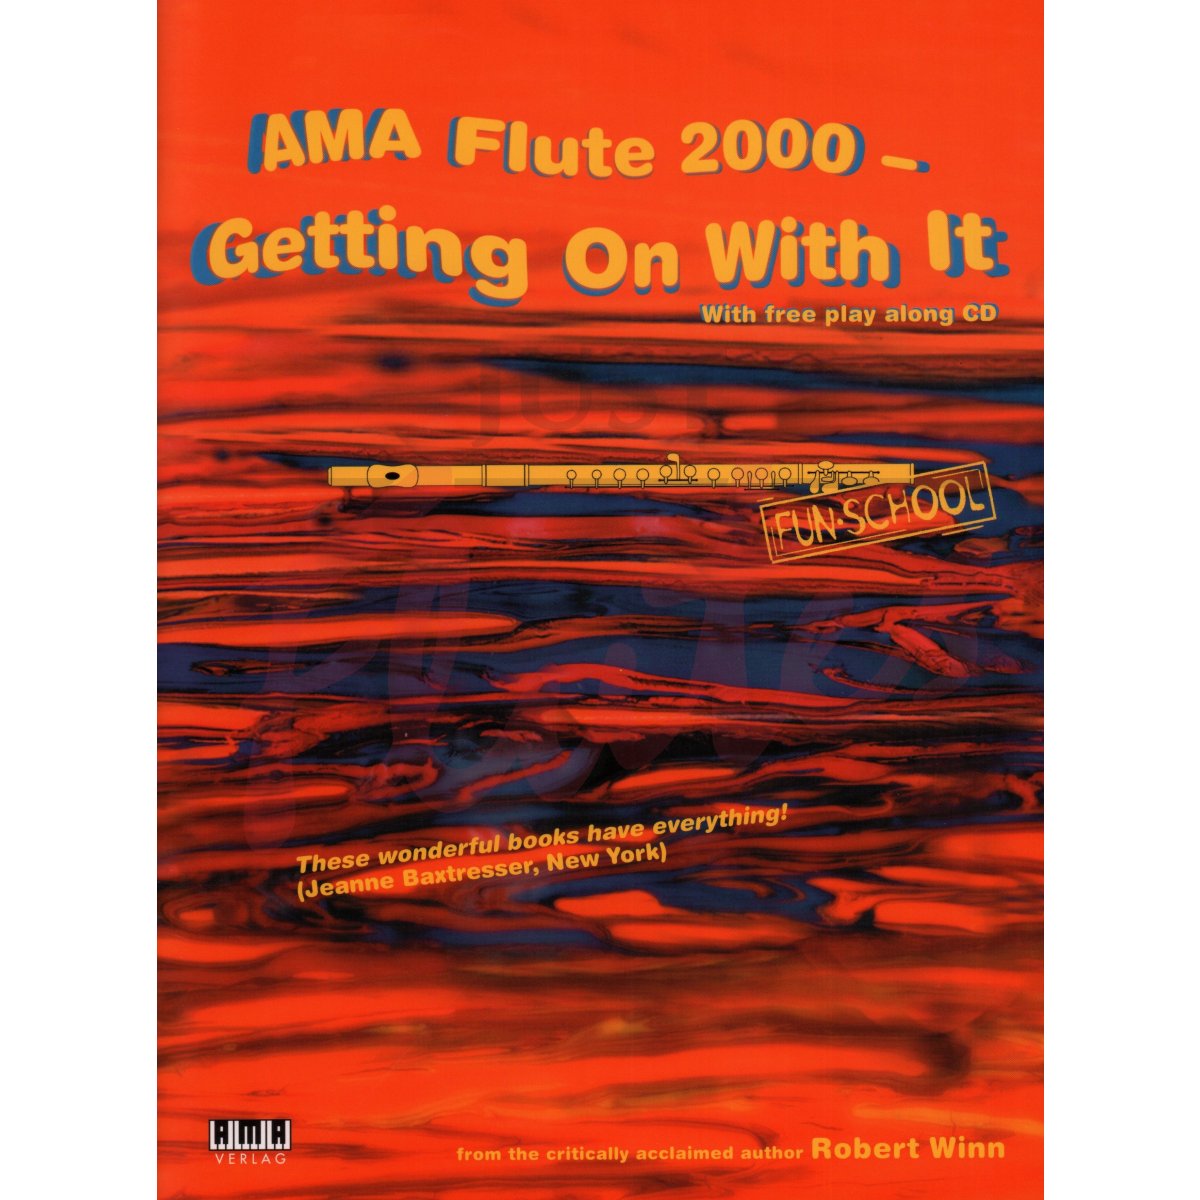 AMA Flute 2000 - Getting On With It